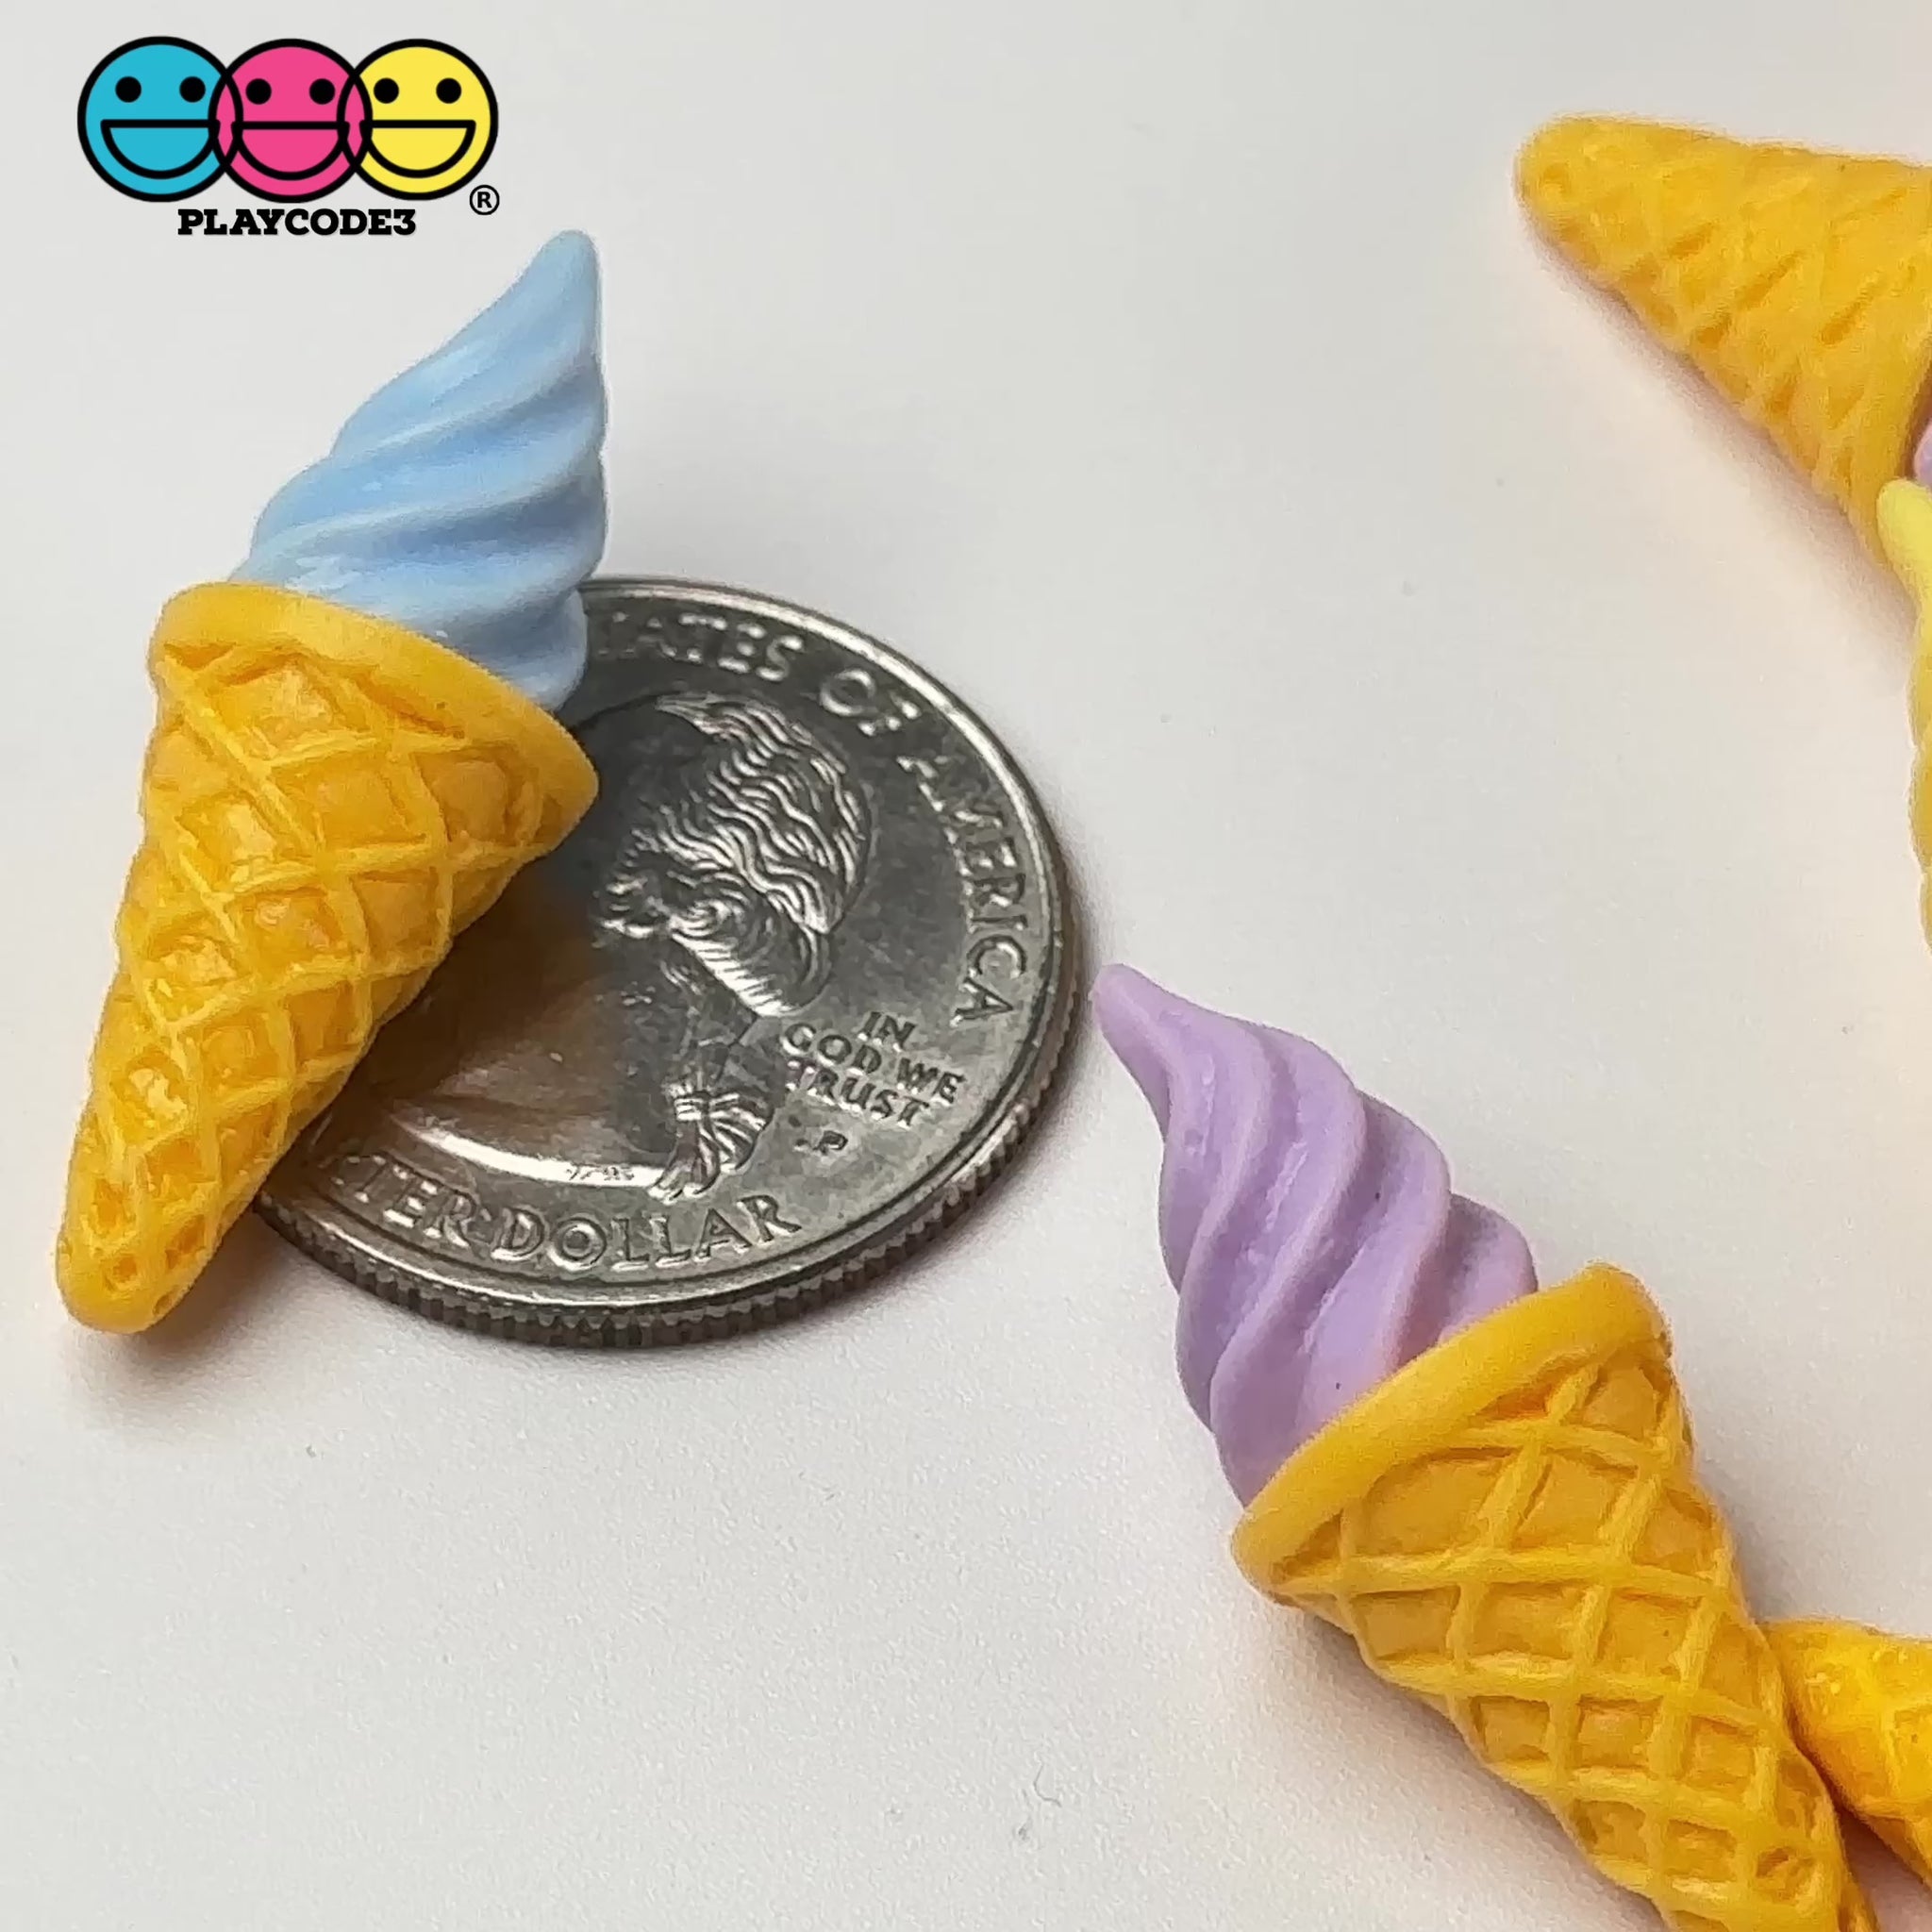 7 icelolly polymer clay cabochons - craftjam